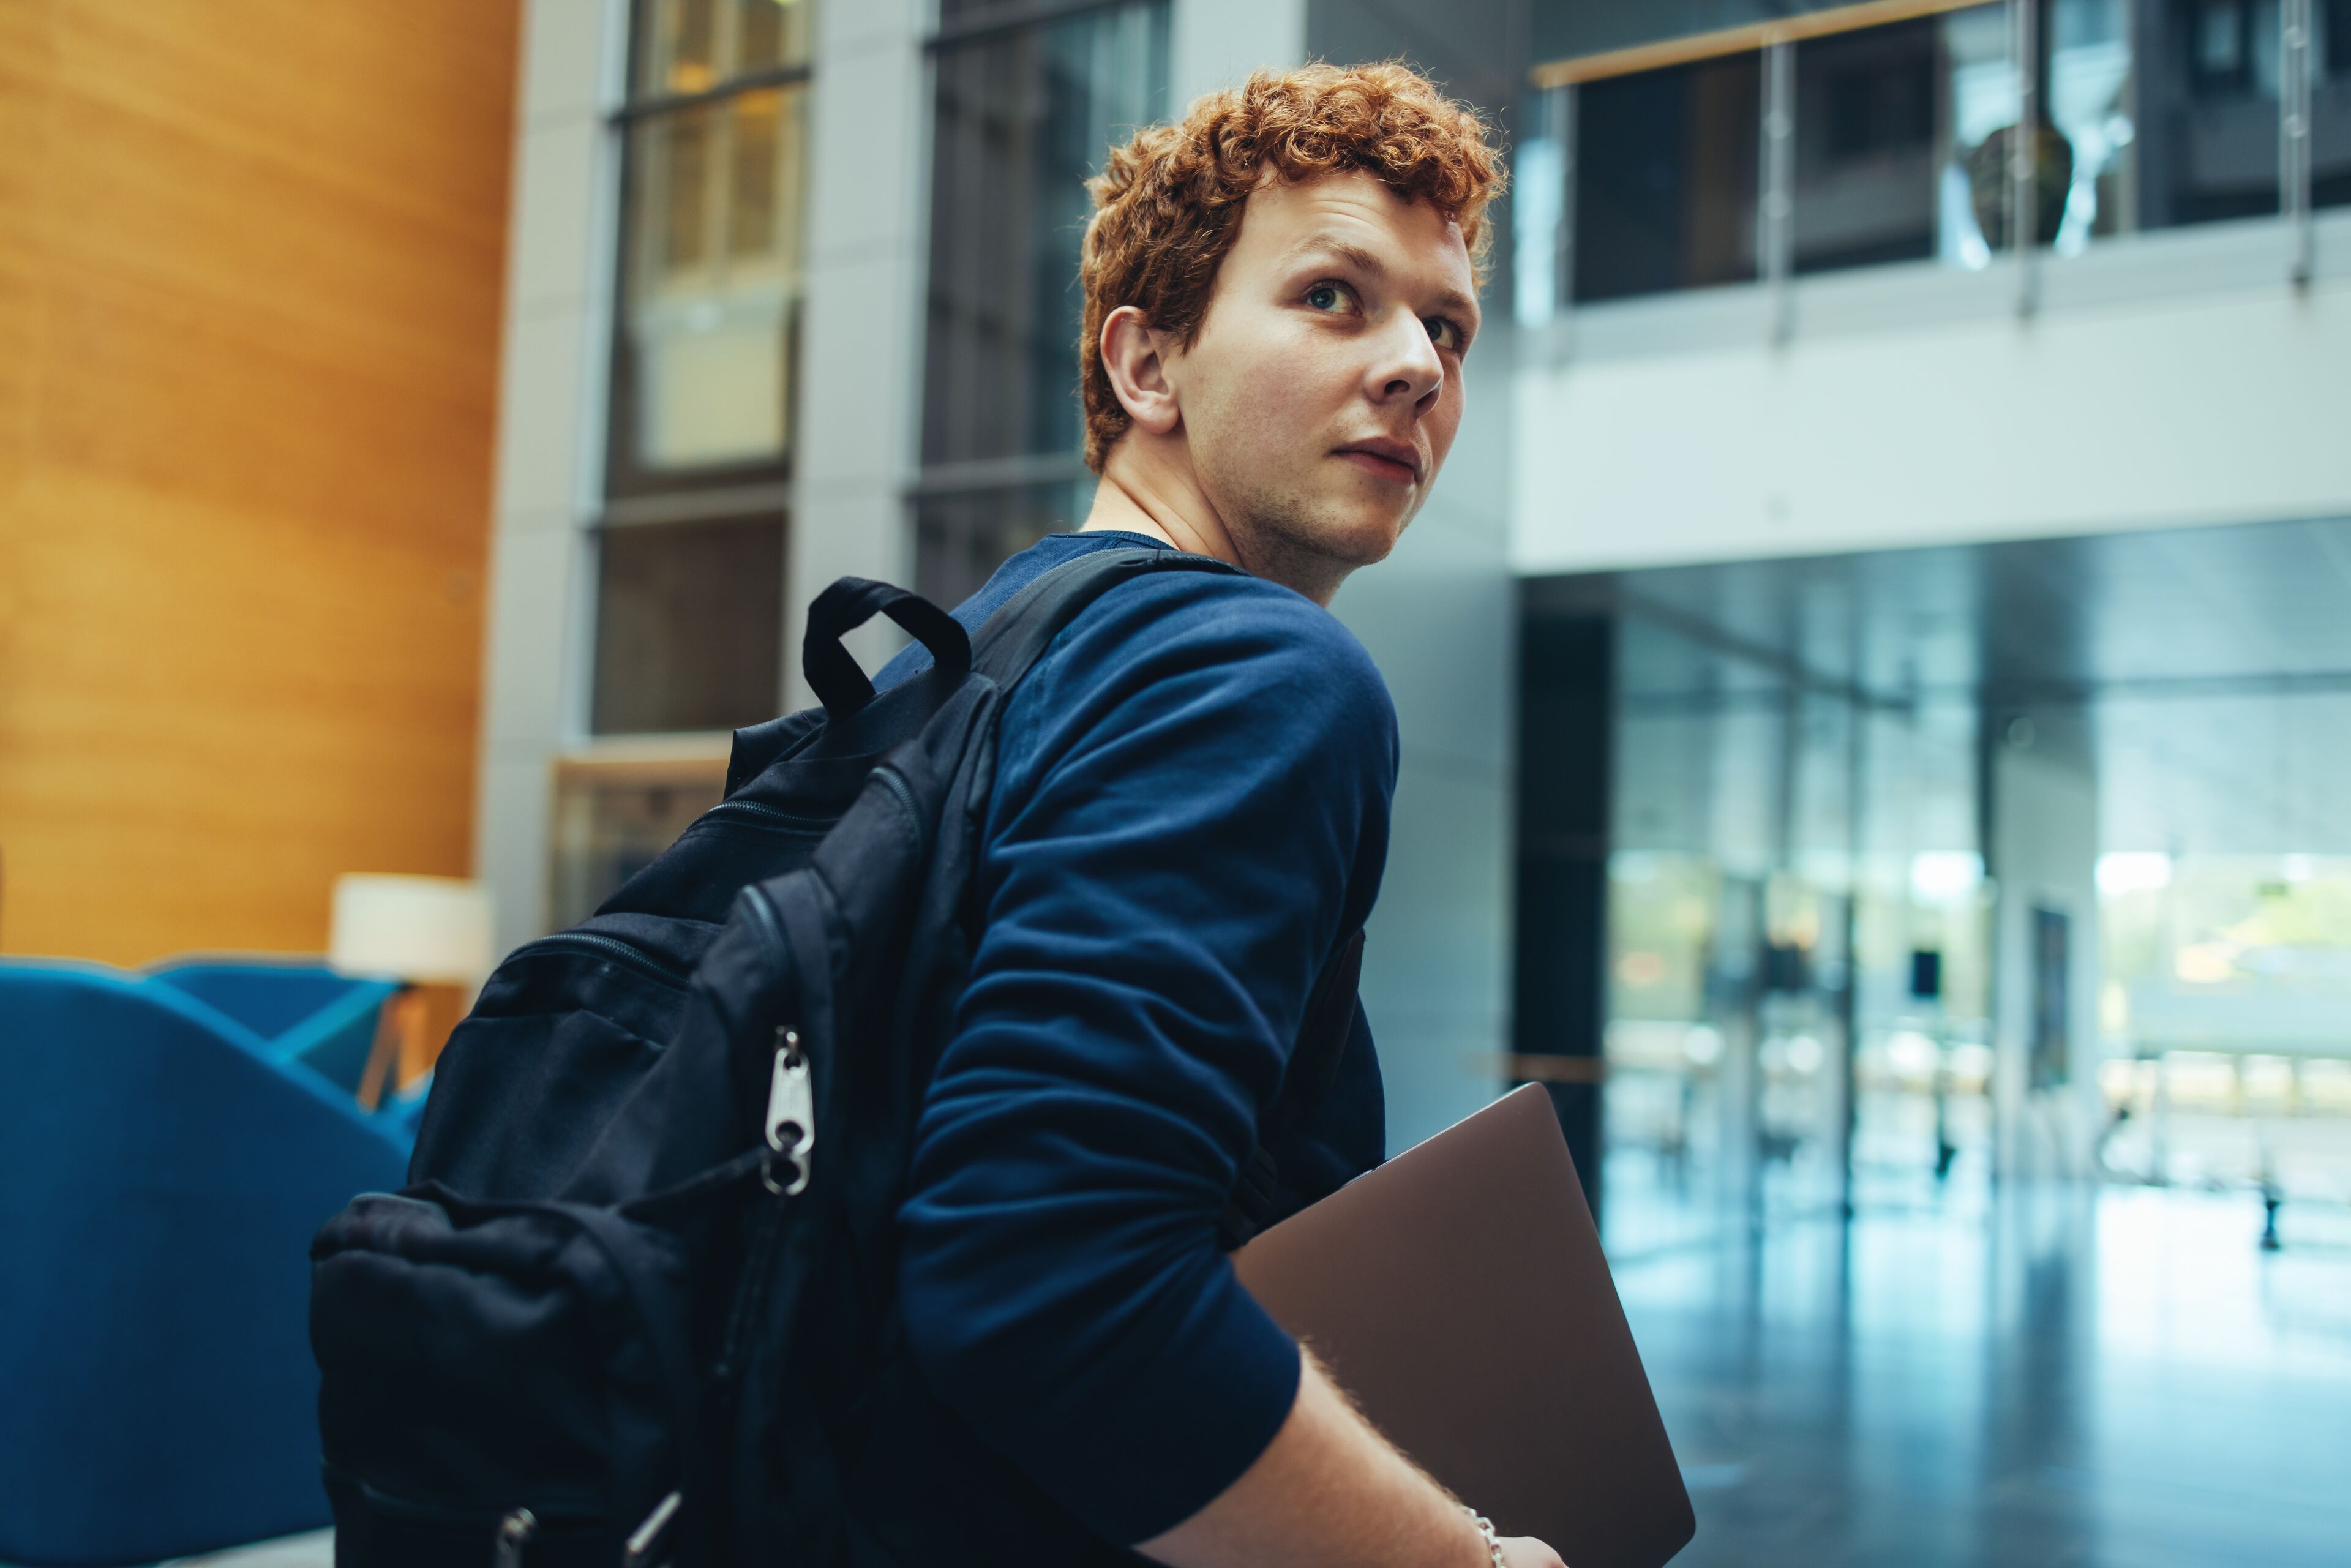 A pensive young man with curly hair, carrying a backpack and laptop, gazes out in a contemporary building.